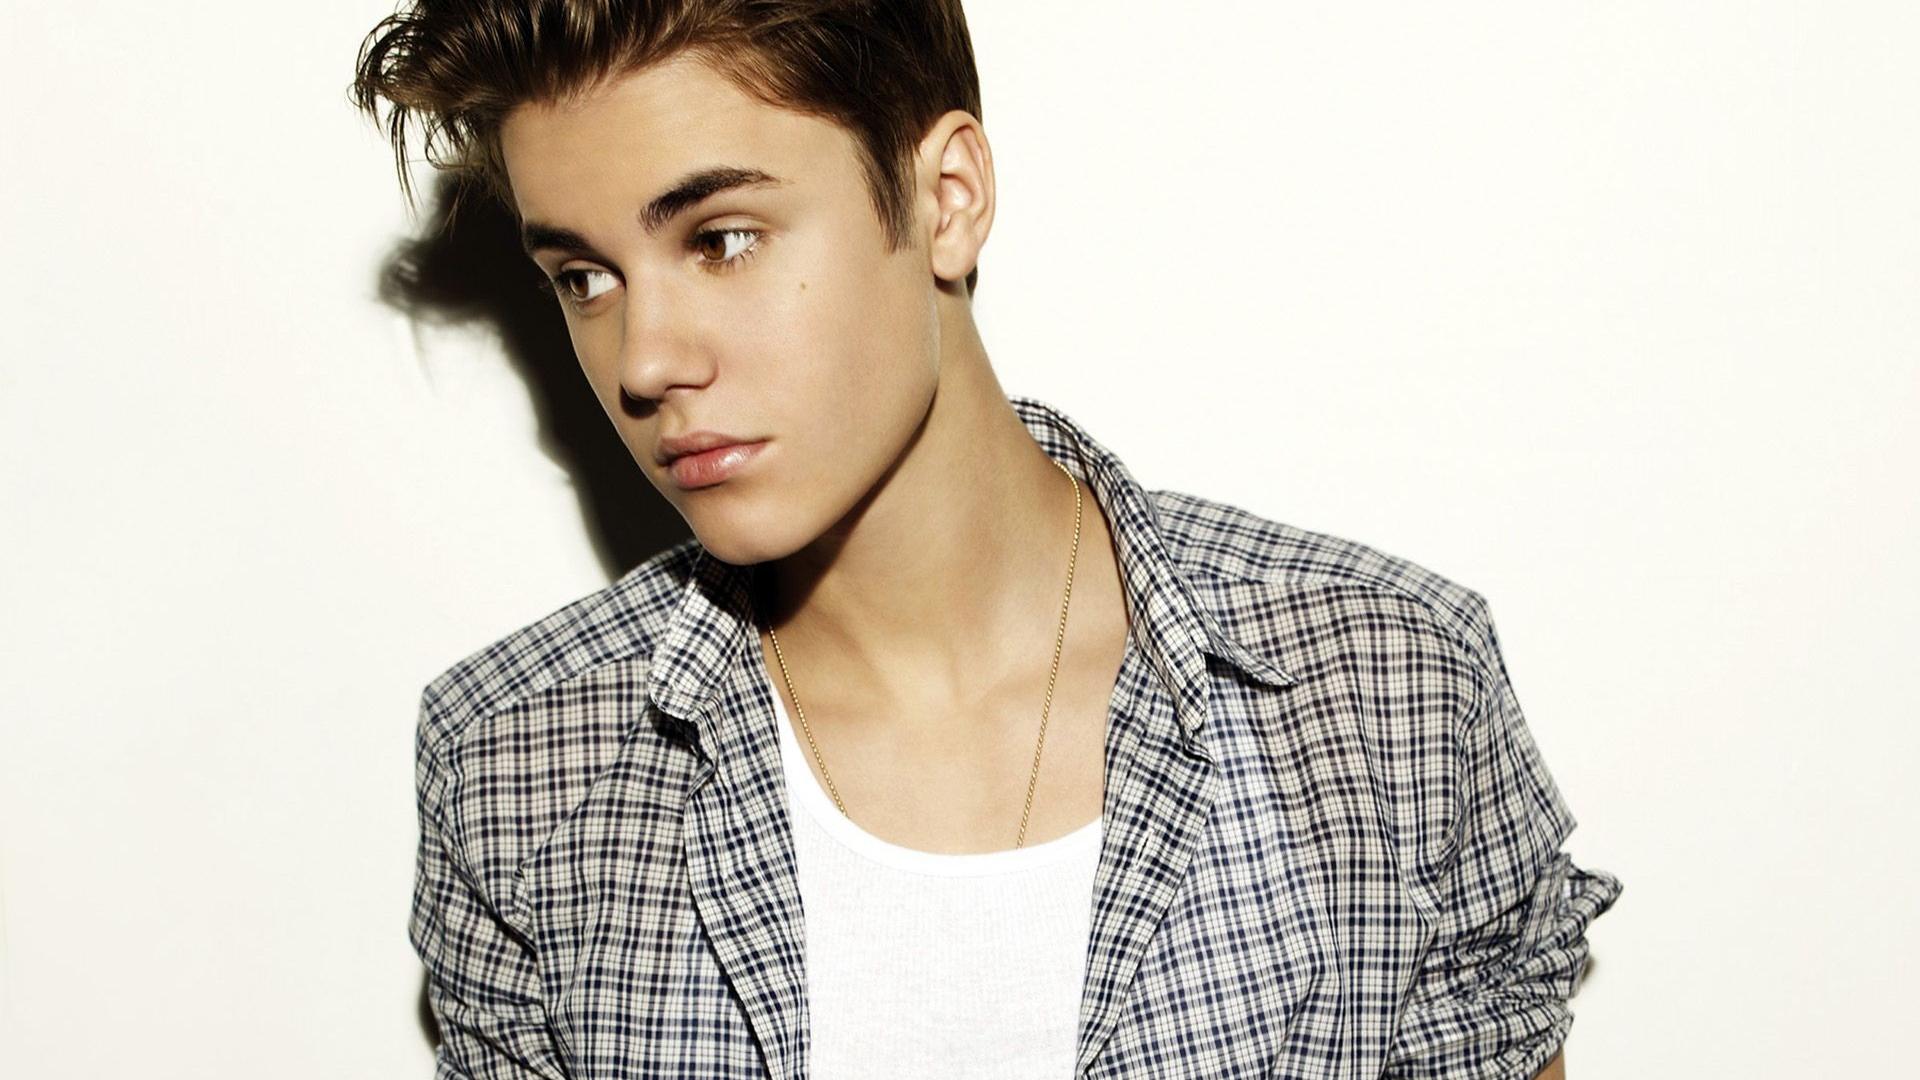 Download Justin Bieber Wallpaper For Windows #fwjnw